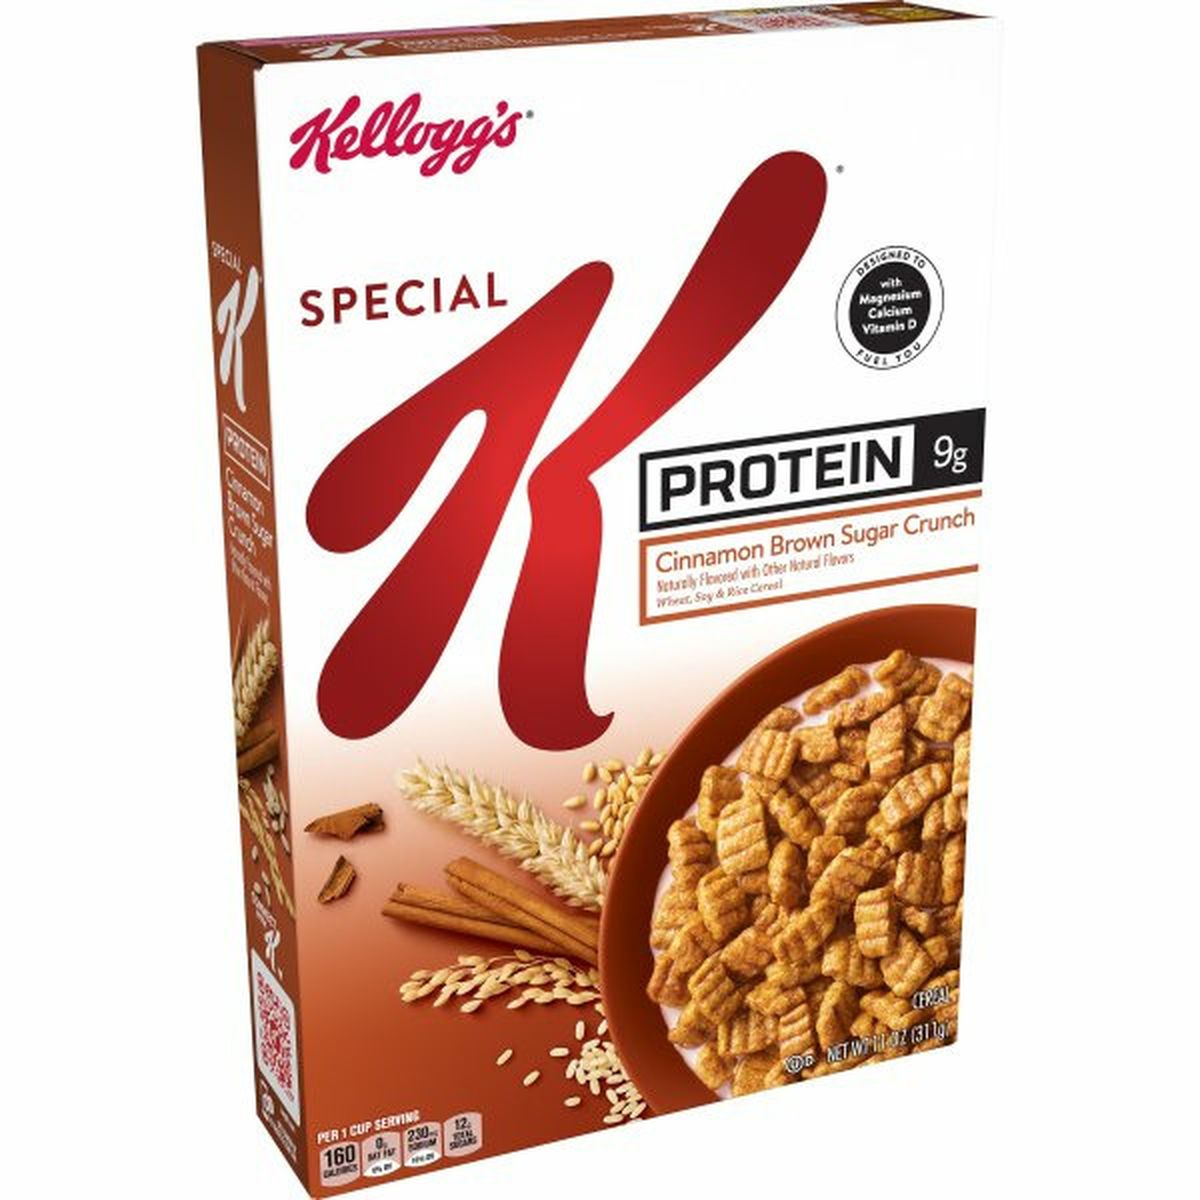 Calories in Kellogg's Special K Protein Cereal Kellogg's Special K Protein Breakfast Cereal, Cinnamon Brown Sugar Crunch, Good Source of Fiber, 11oz